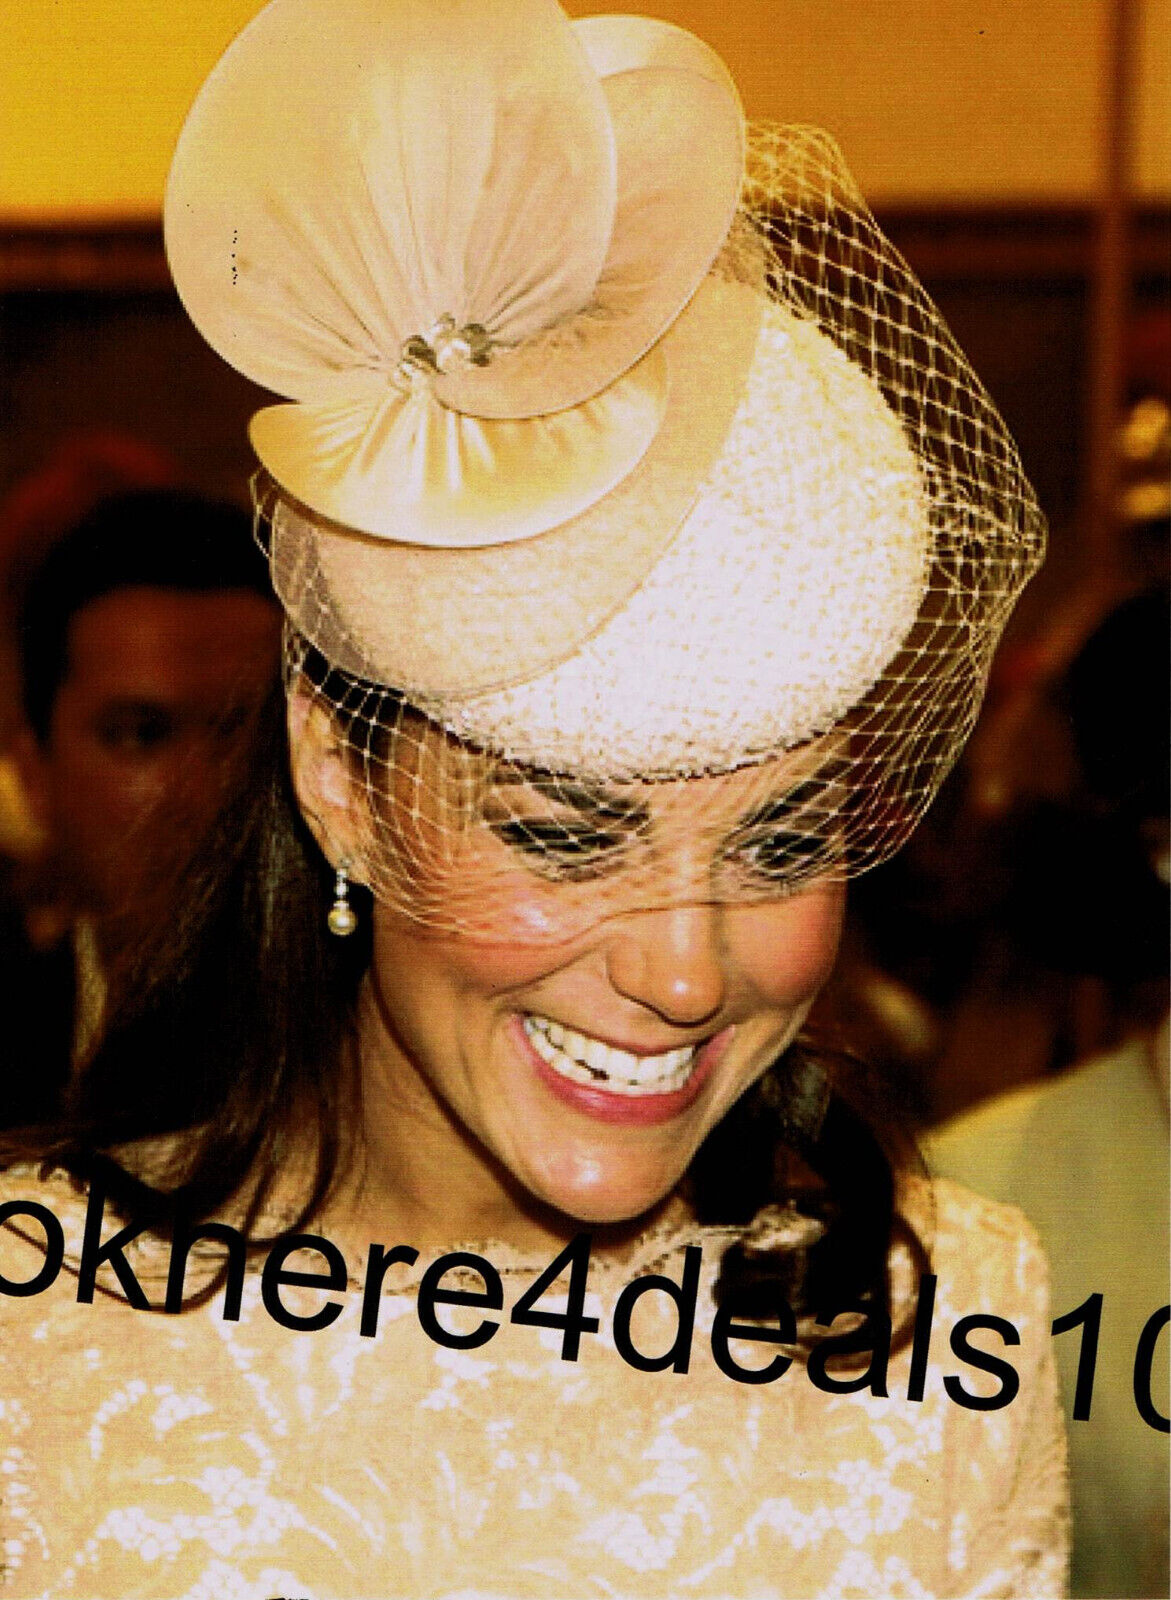 Kate Middleton Photo 8.5x11 Royal Collectibles Great Britain London England Без бренда